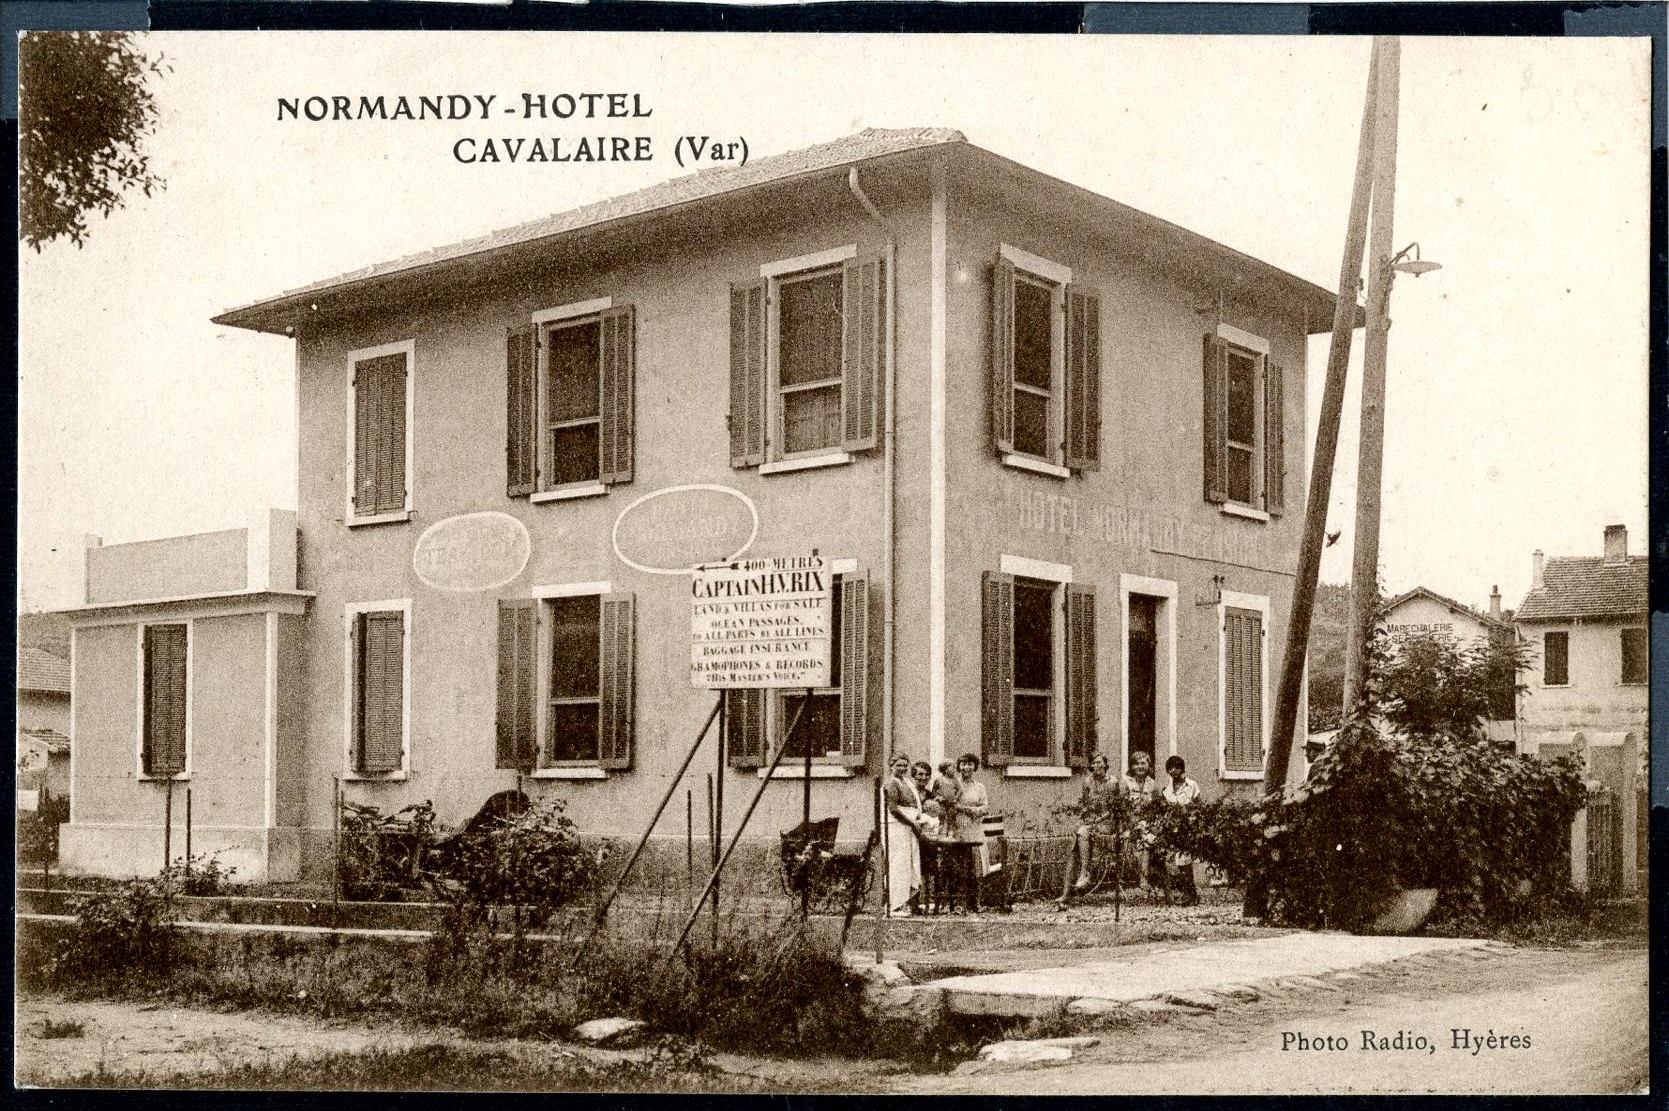 CAVALAIRE-NORMANDY-HOTEL